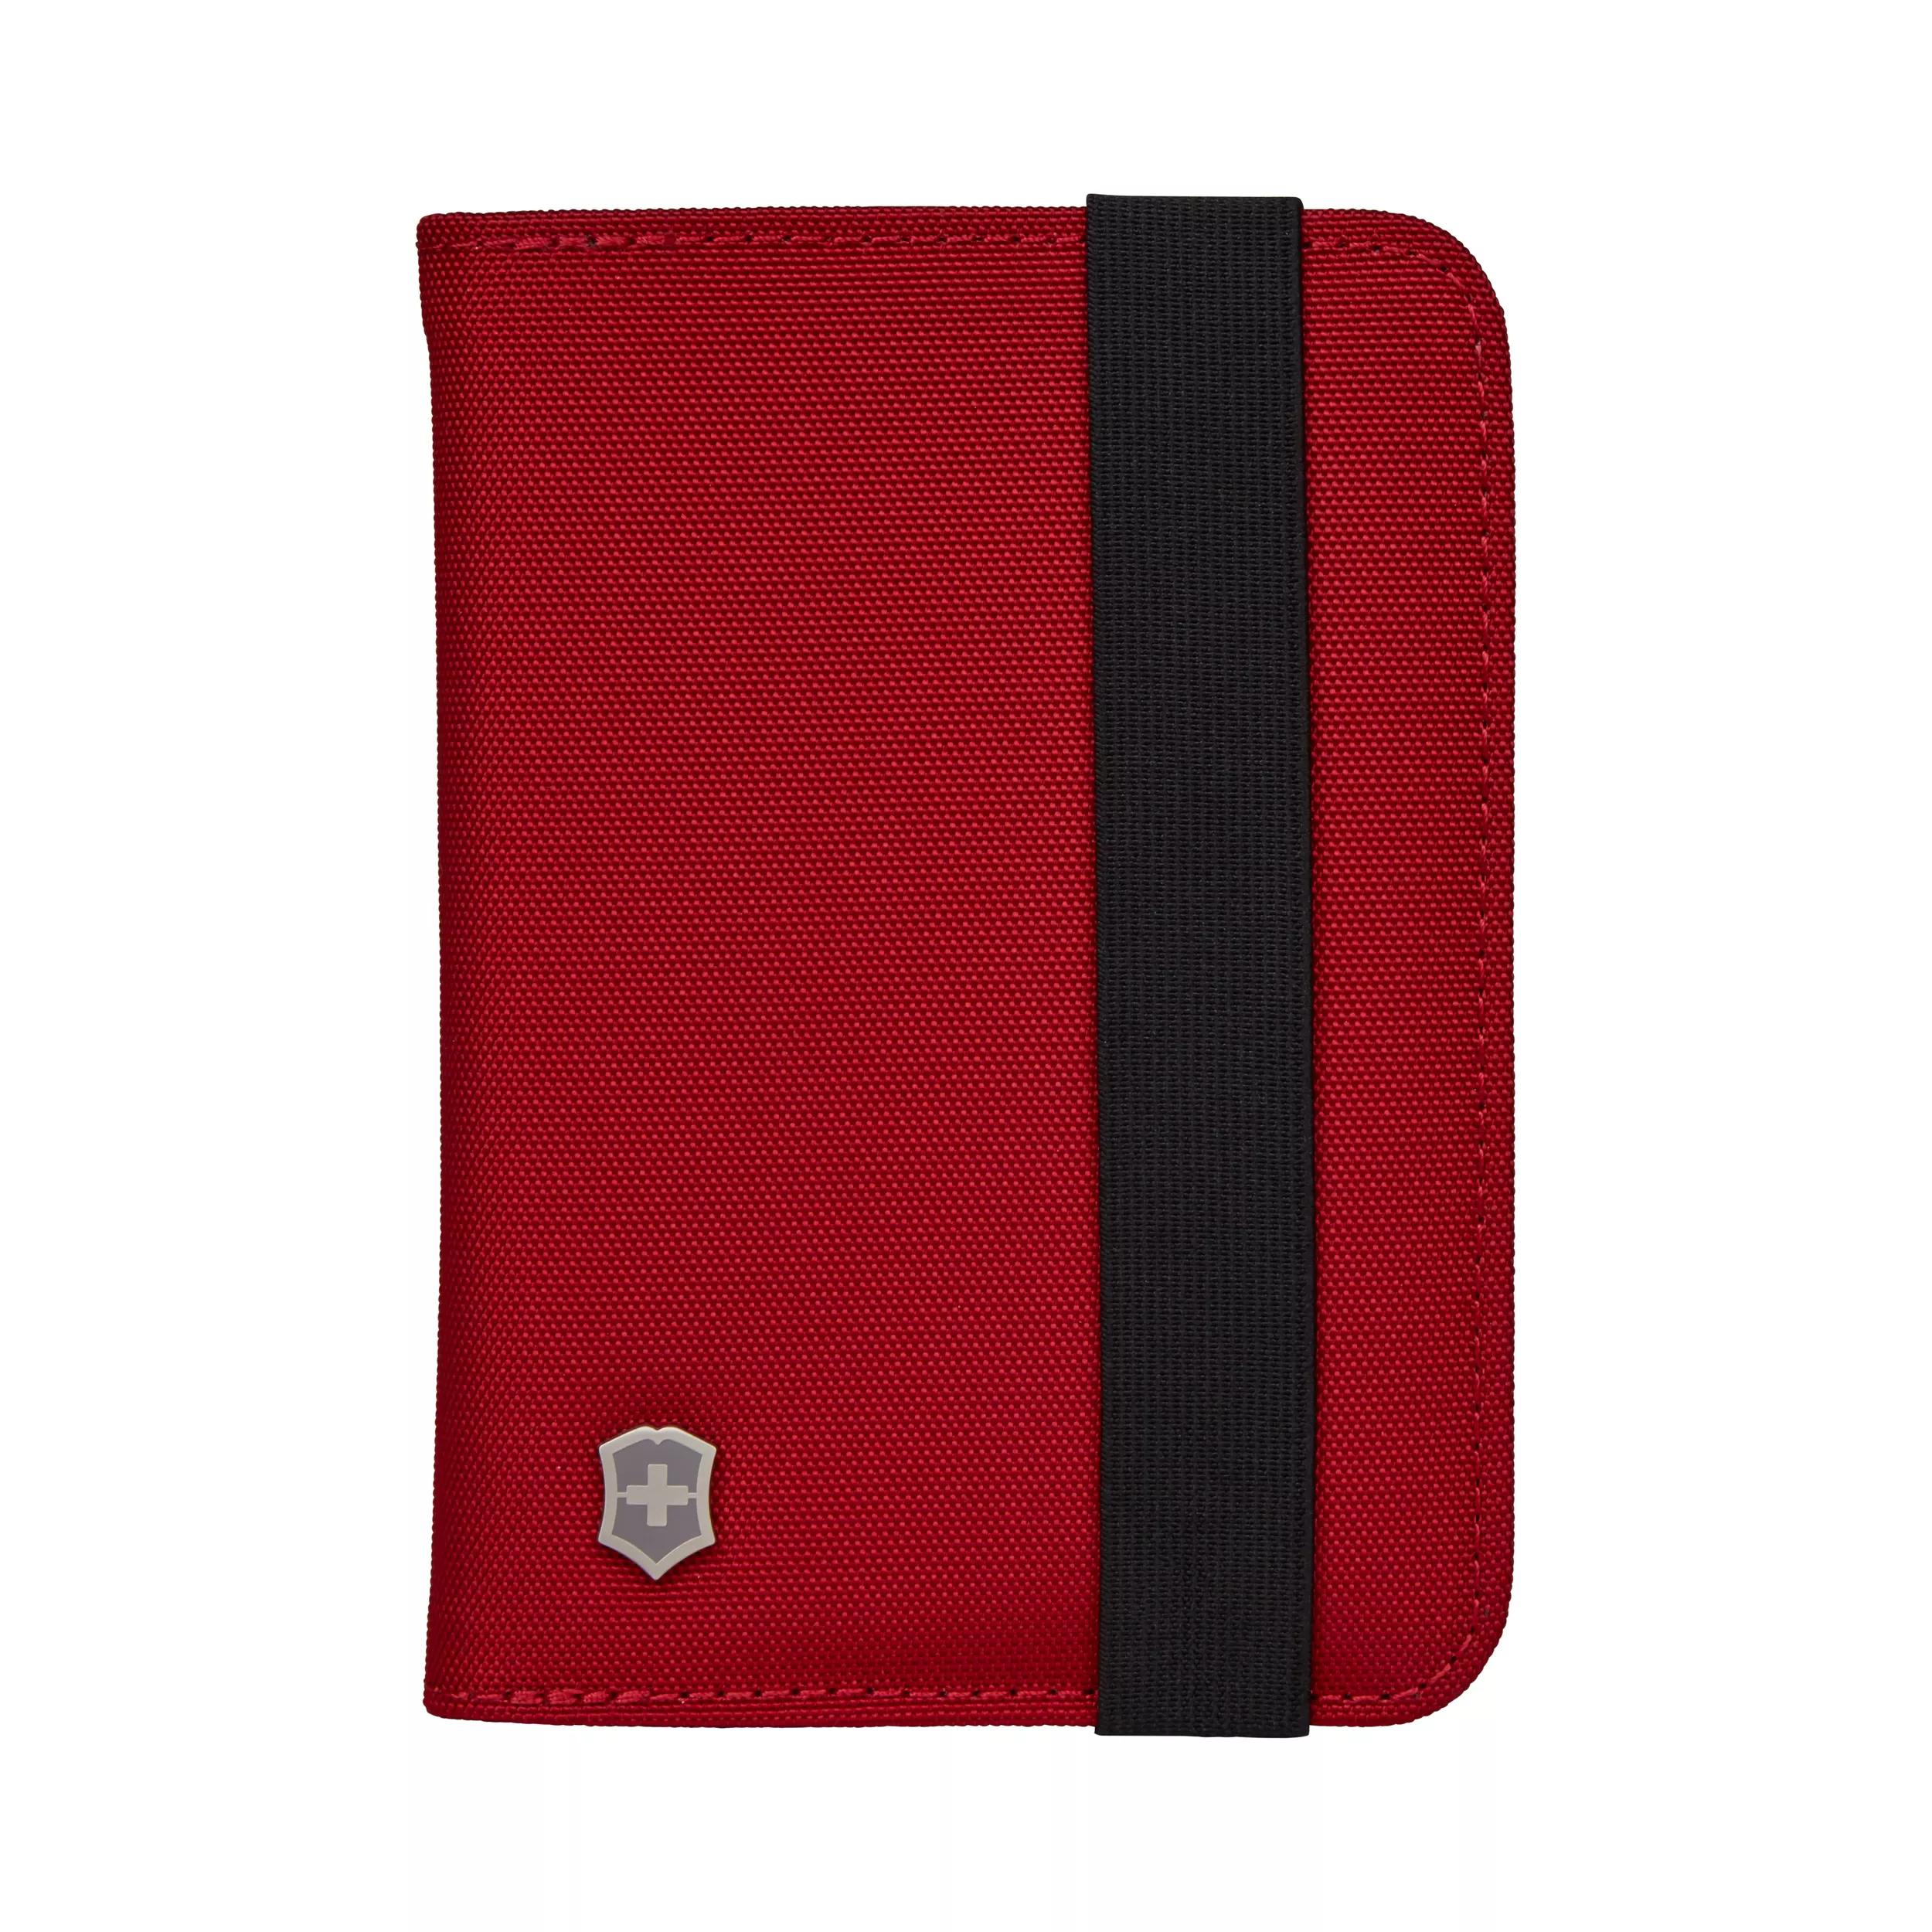 Victorinox Travel Accessories 5.0 Passport Holder with RIFD Protection in  red - 610607